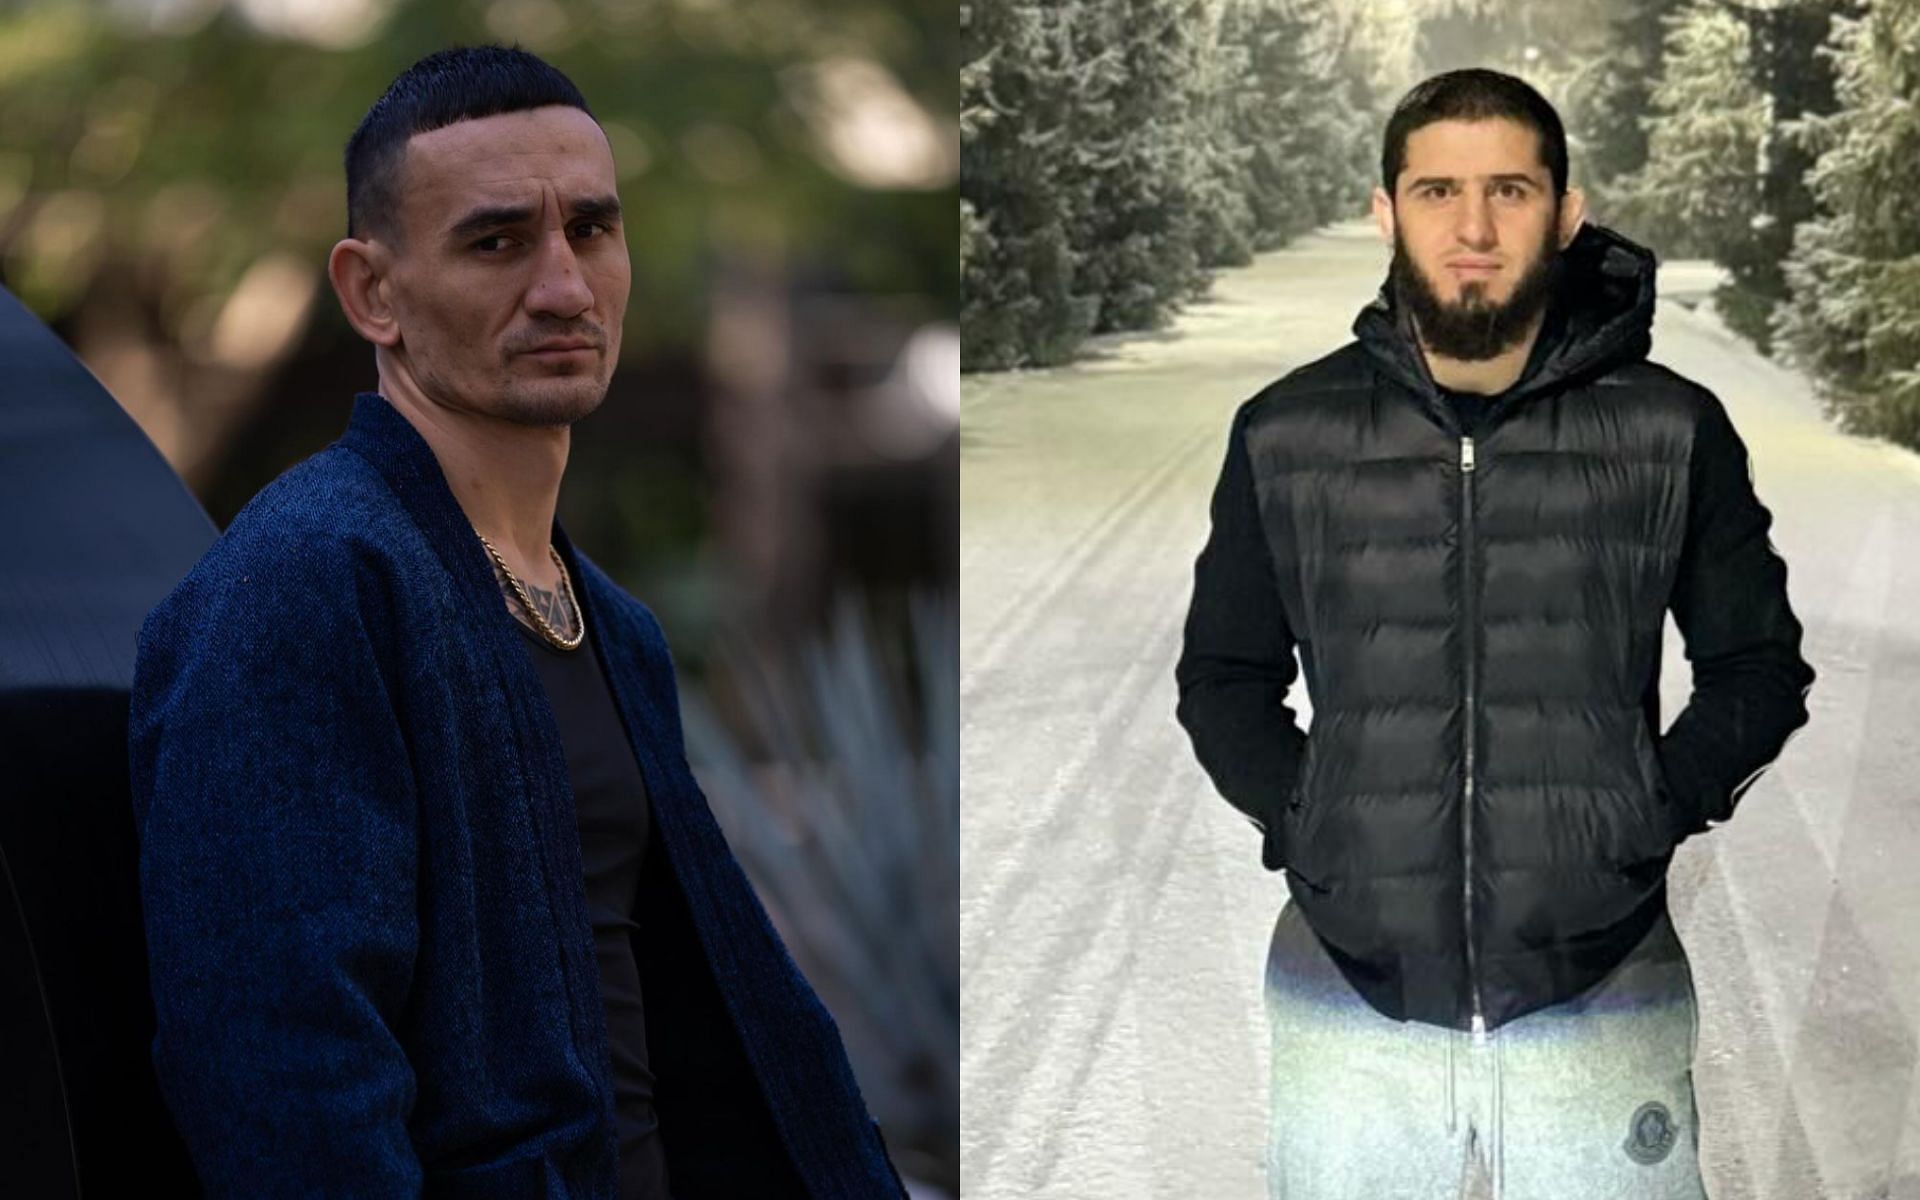 Max Holloway (left) and Islam Makhachev (right) go back-and-forth on social media [Photo Courtesy @blessedmma and @islam_makhachev on Instagram]